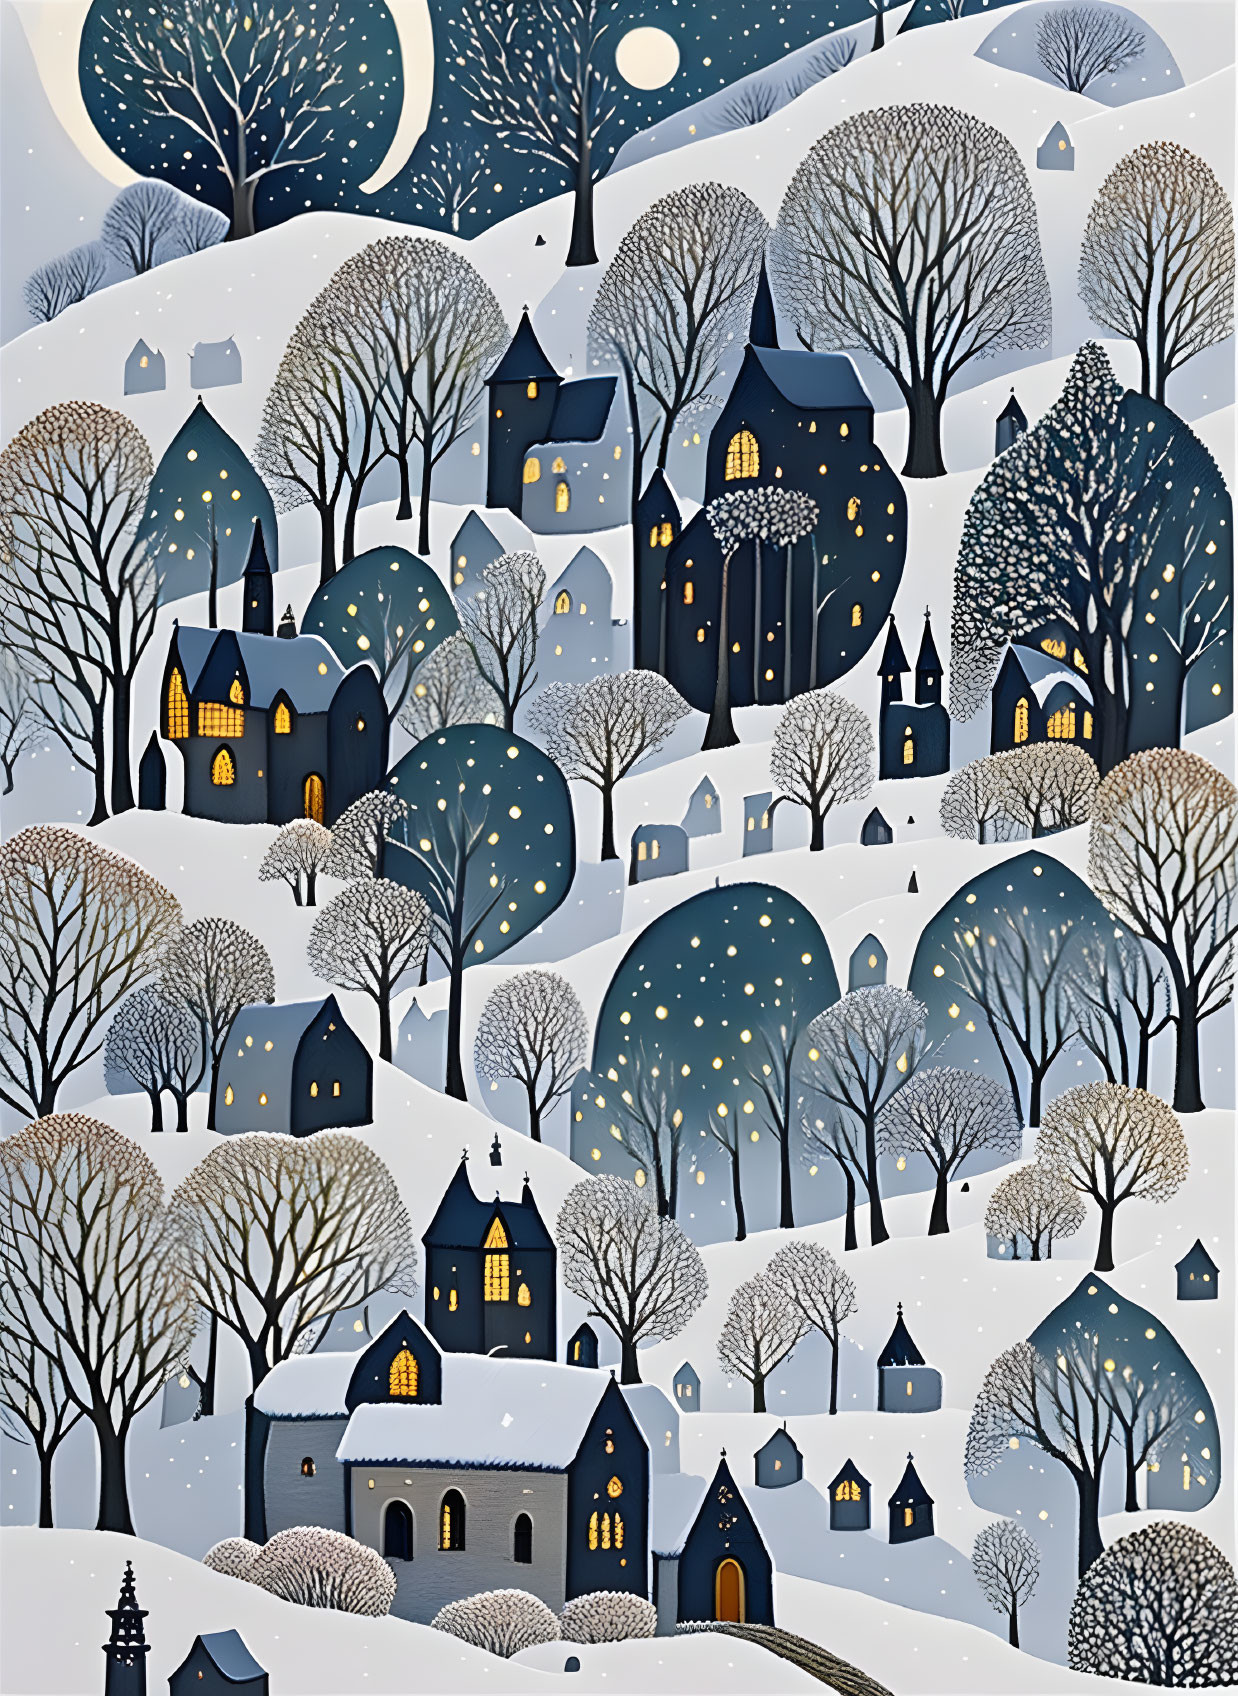 Snowy village at night: Cozy houses, snow-covered trees